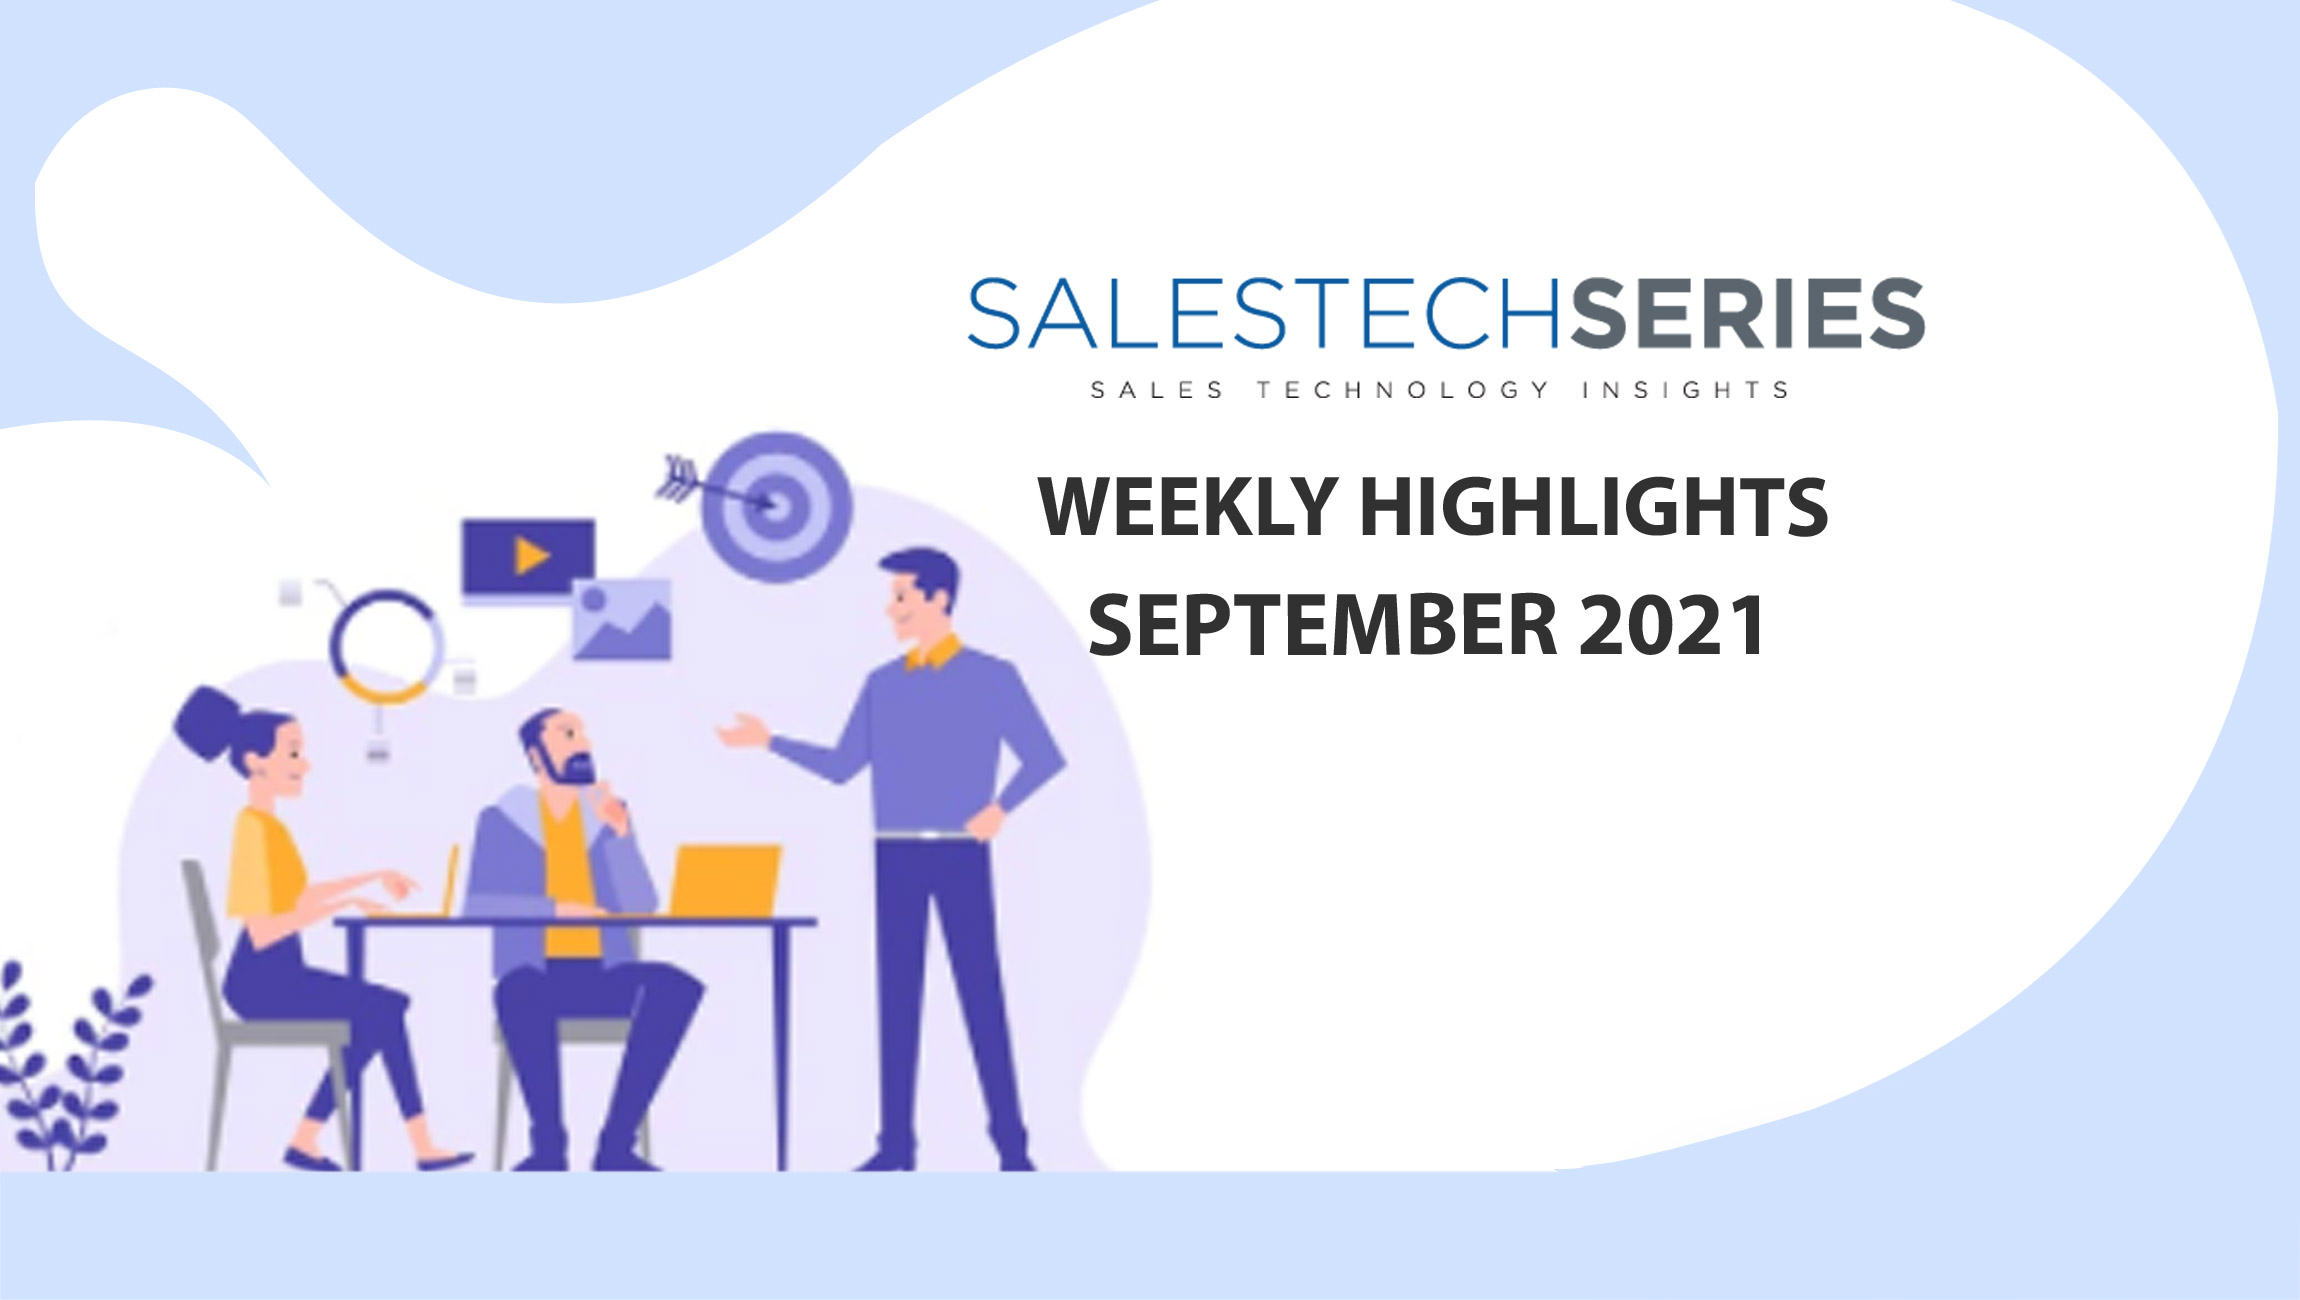 SalesTechStar’s Sales Technology Highlights of The Week: Featuring Chili Piper, Clari, Spiff, LogMeIn and more!